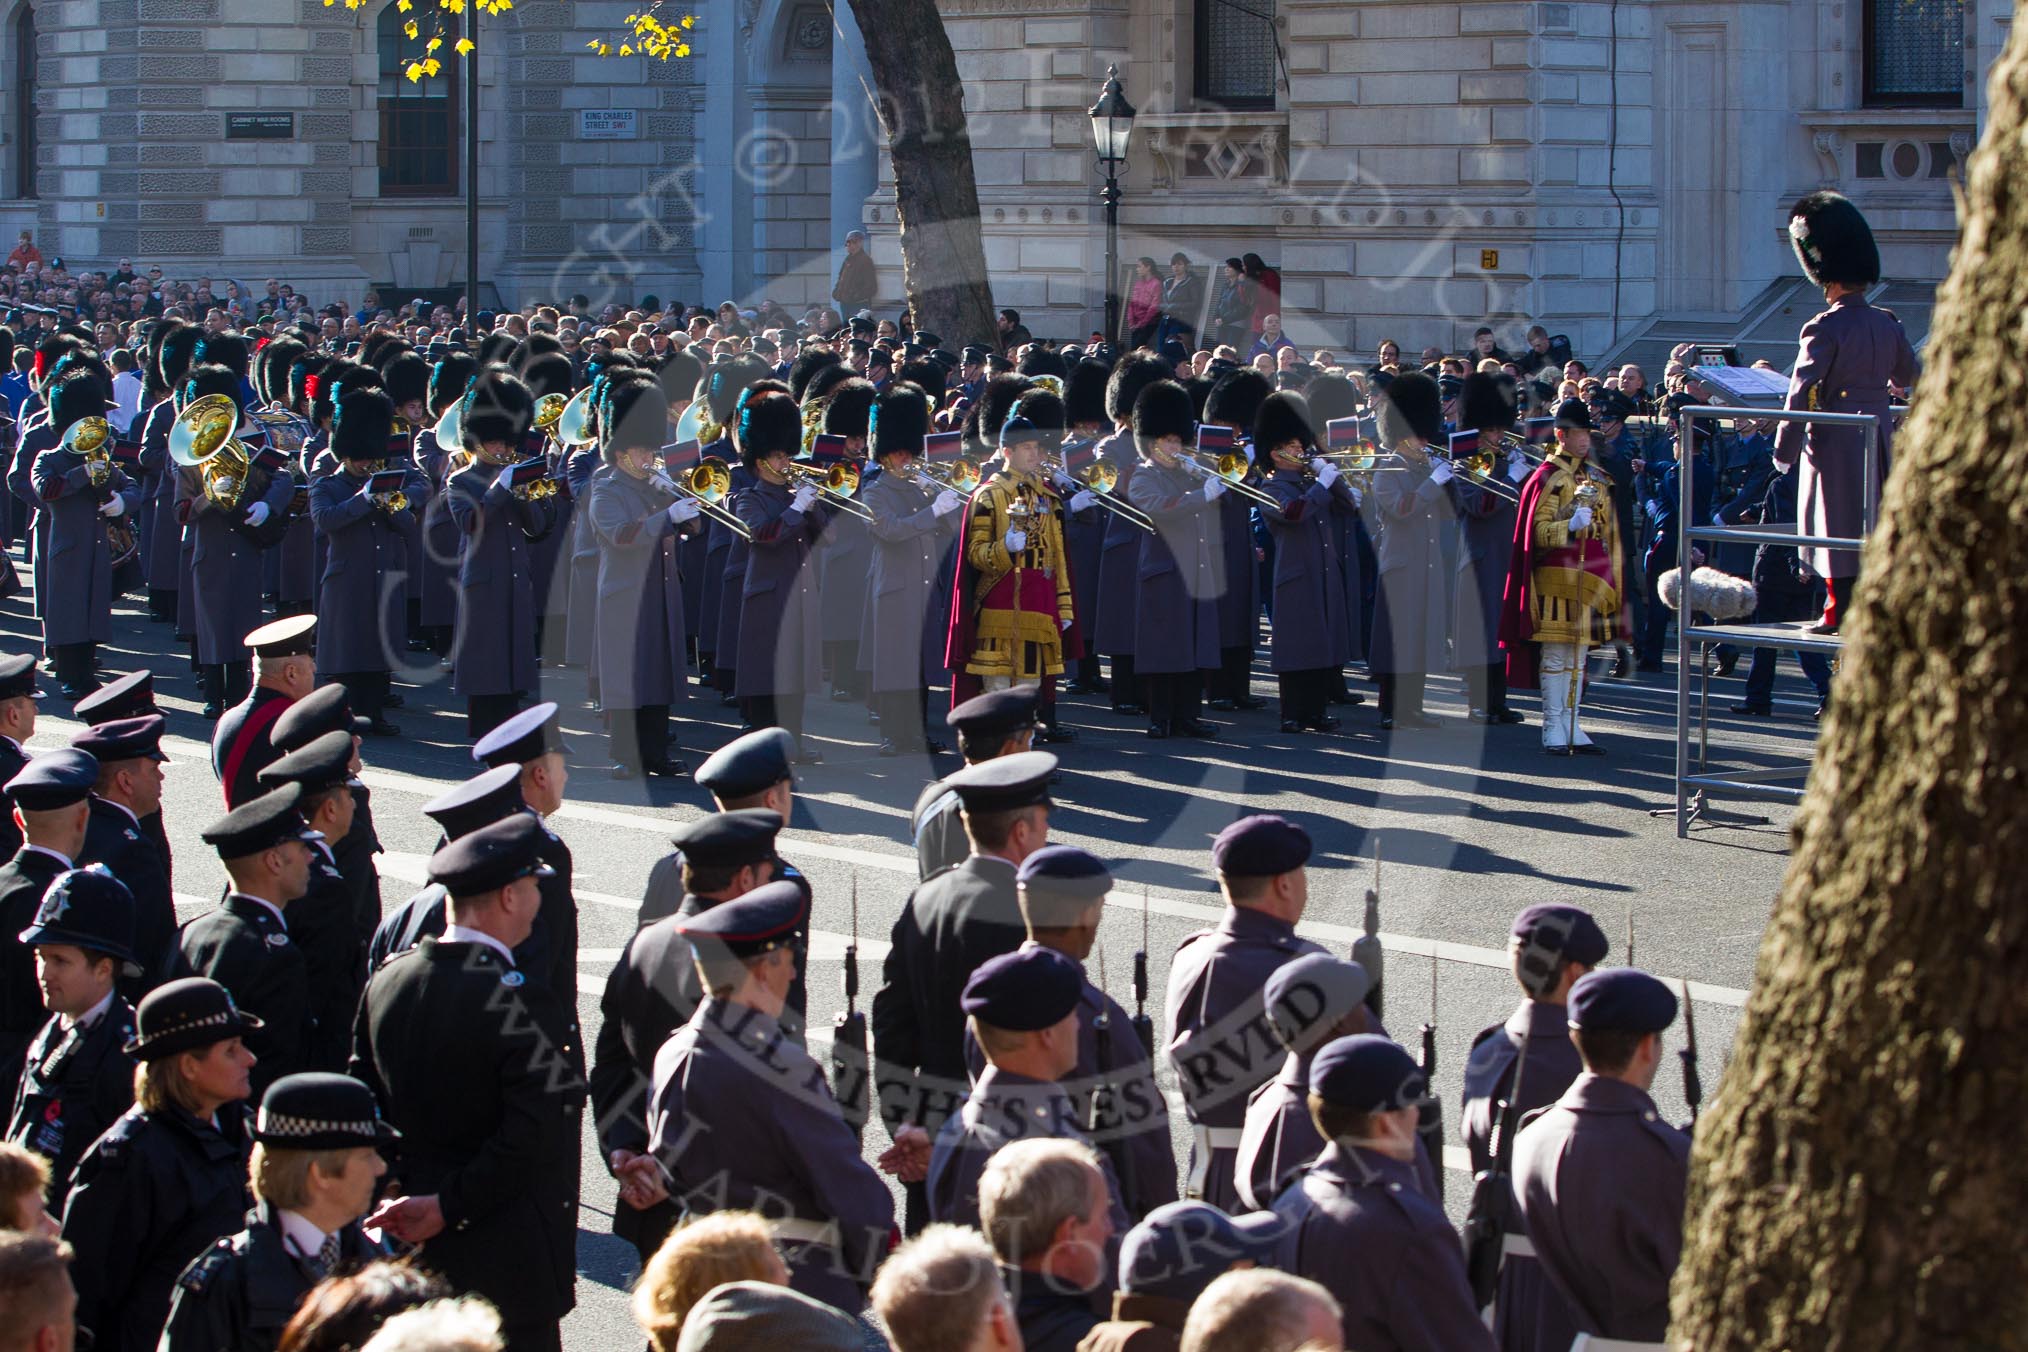 Remembrance Sunday 2012 Cenotaph March Past: The Massed Bands playing on the western side of Whitehall after the March Past..
Whitehall, Cenotaph,
London SW1,

United Kingdom,
on 11 November 2012 at 12:16, image #1776